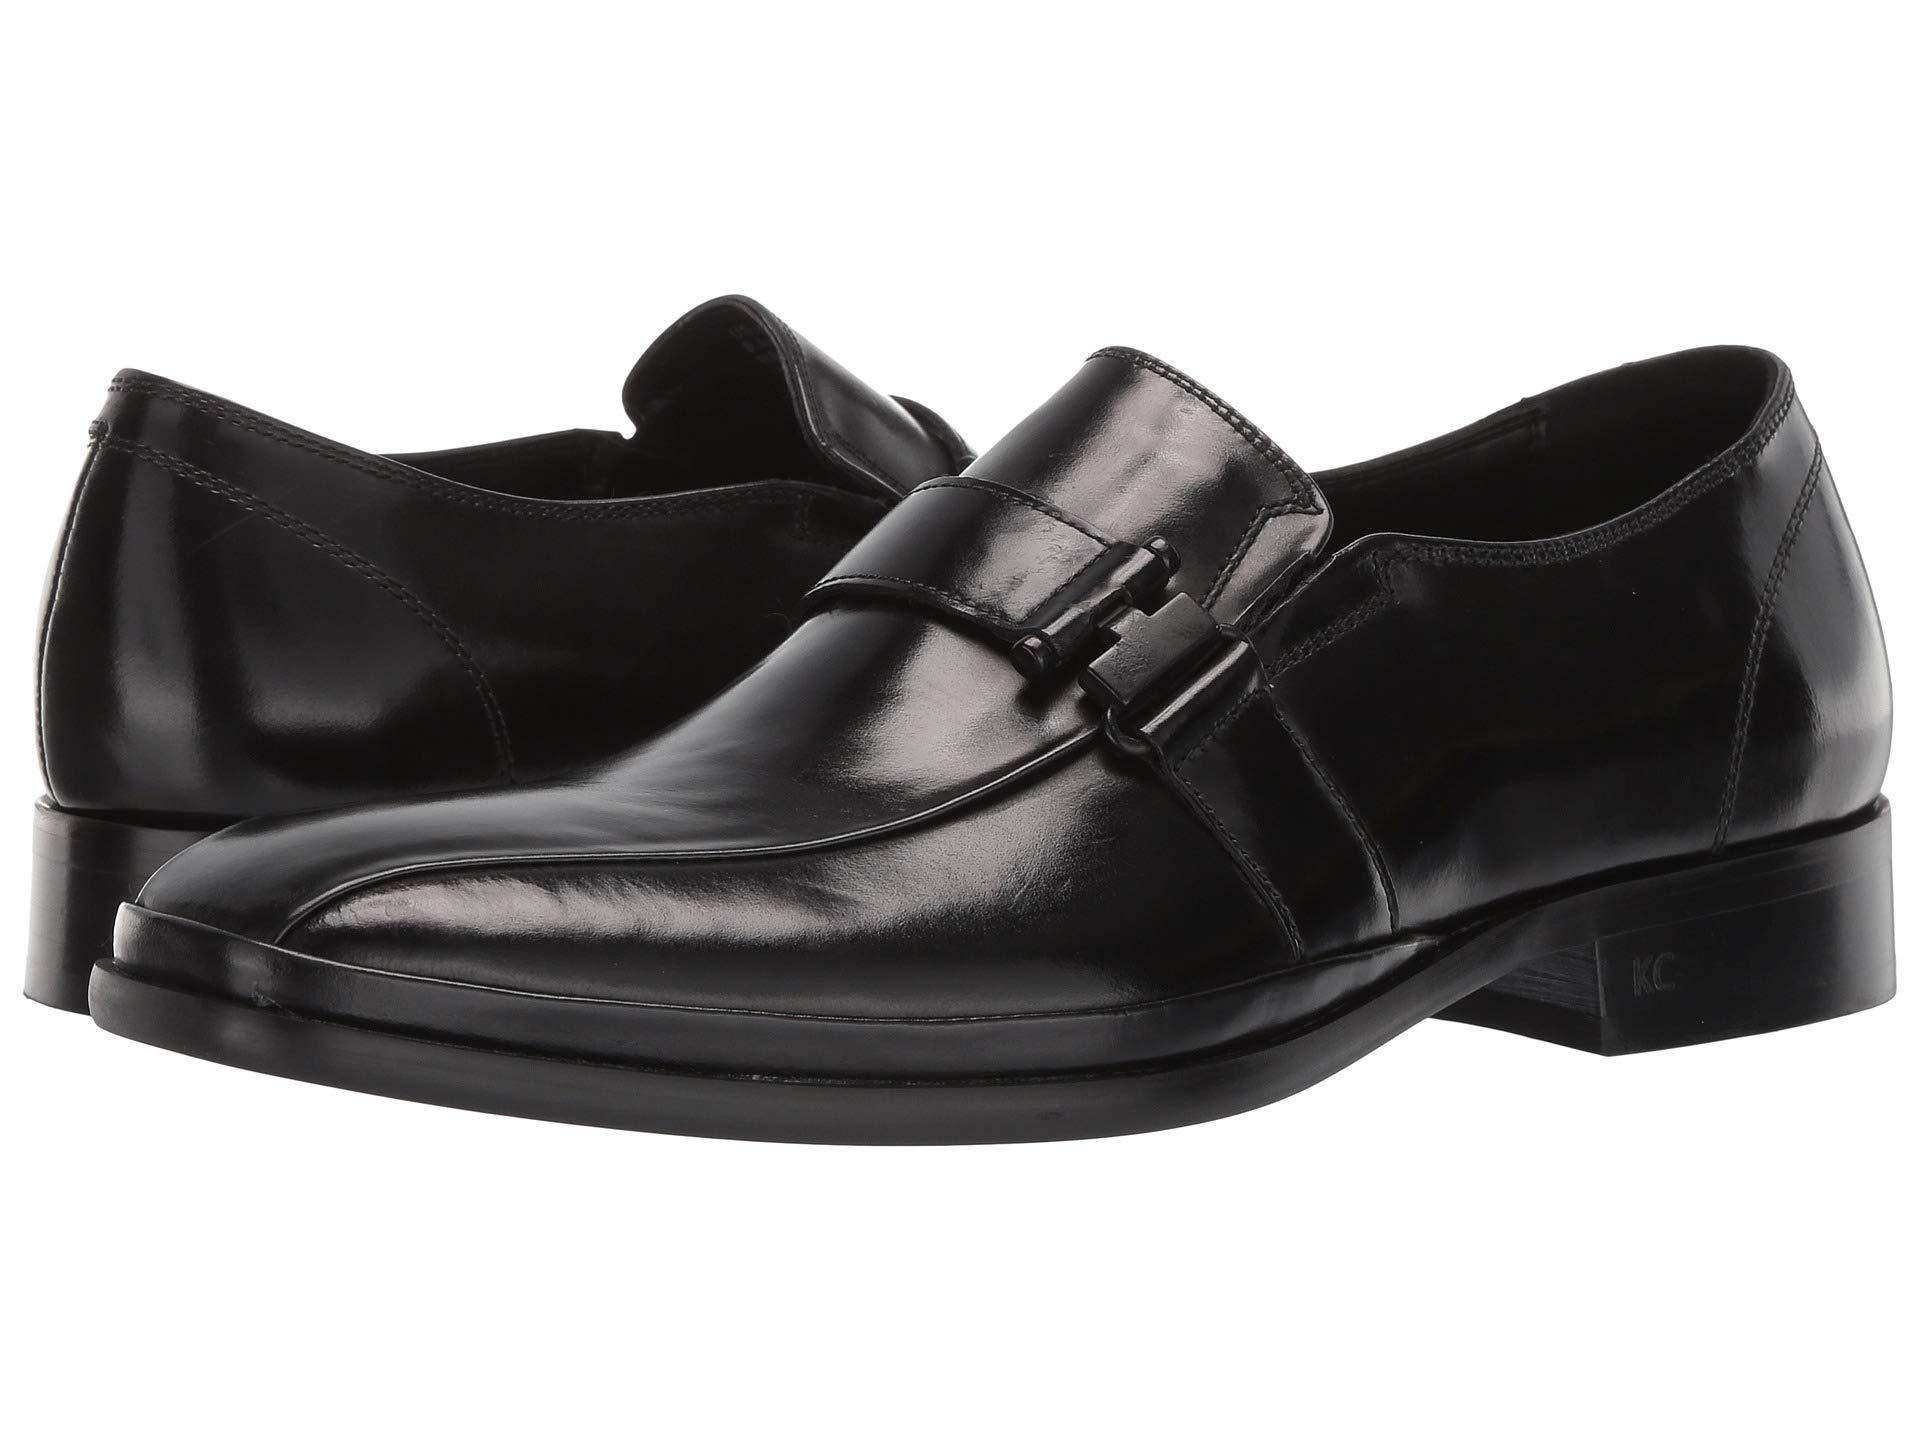 Kenneth Cole Reaction Leather Avery Slip-on in Black for Men - Lyst